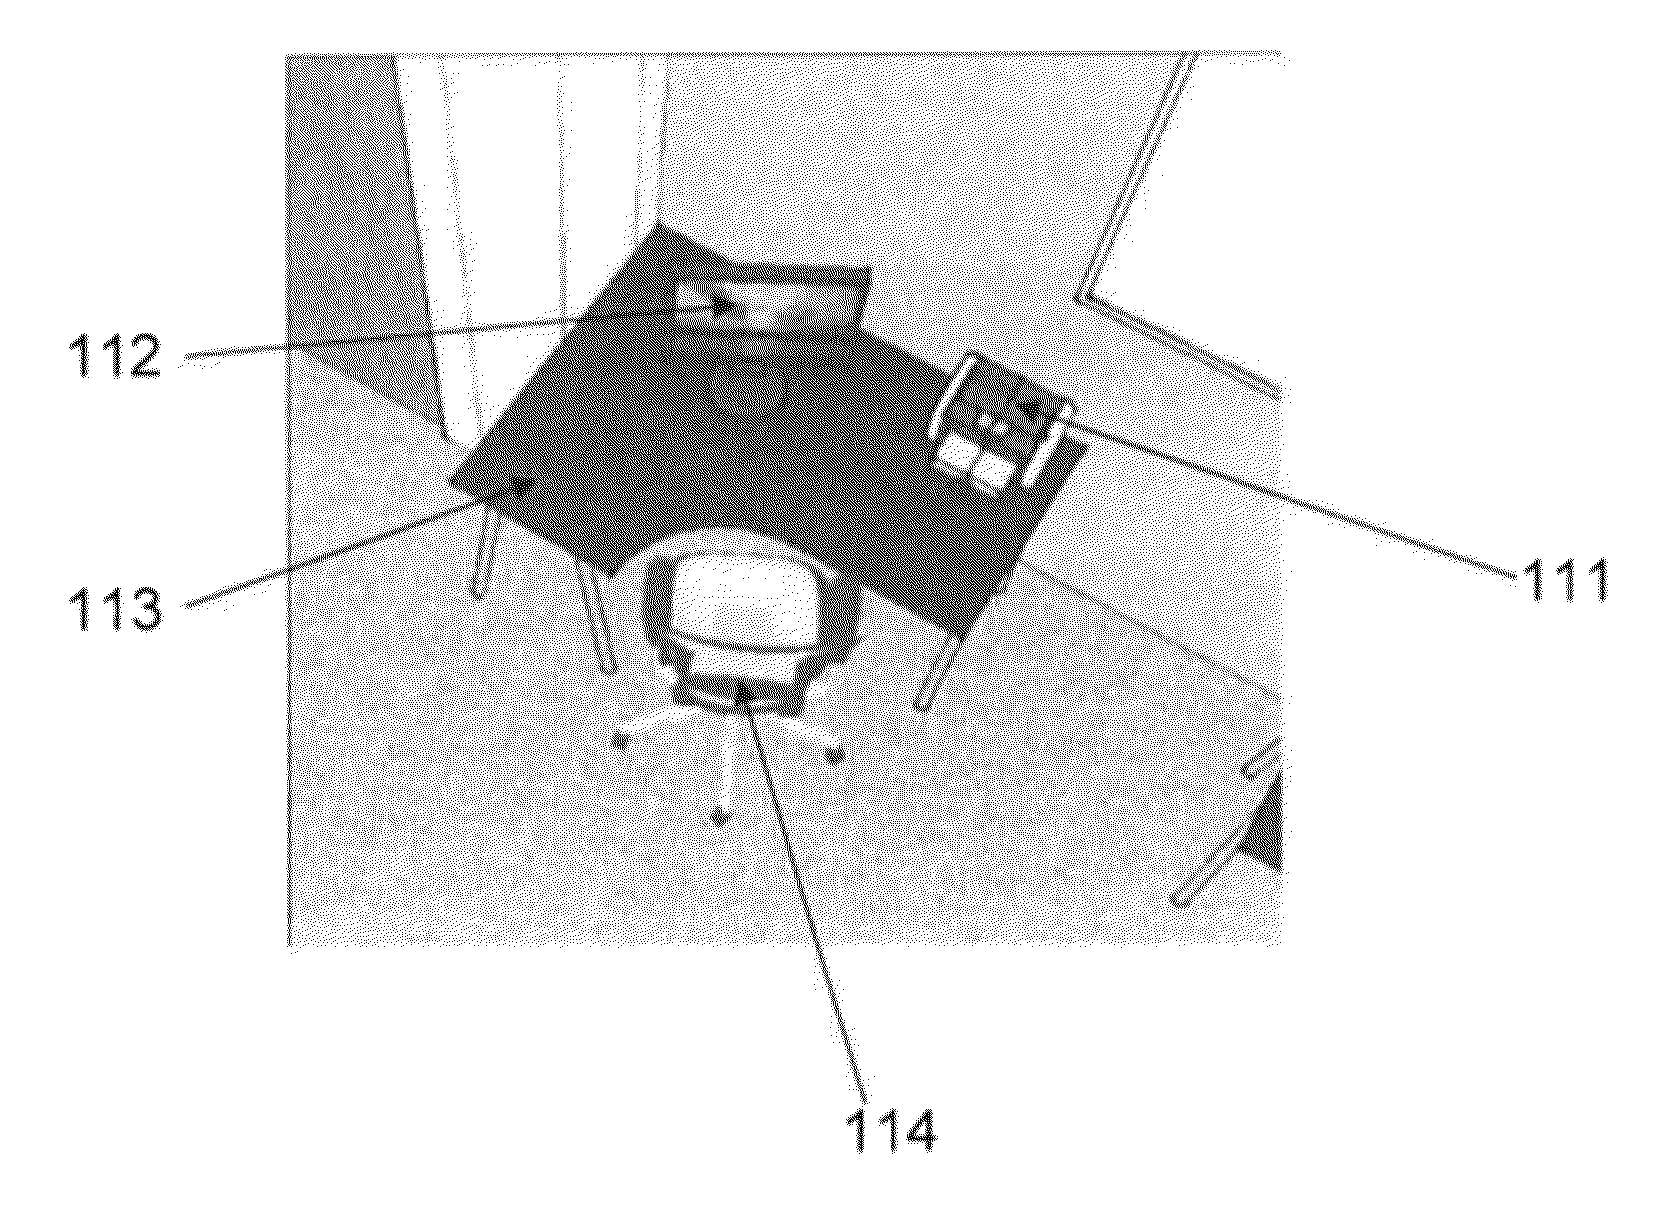 System and Method for Virtual Object Placement